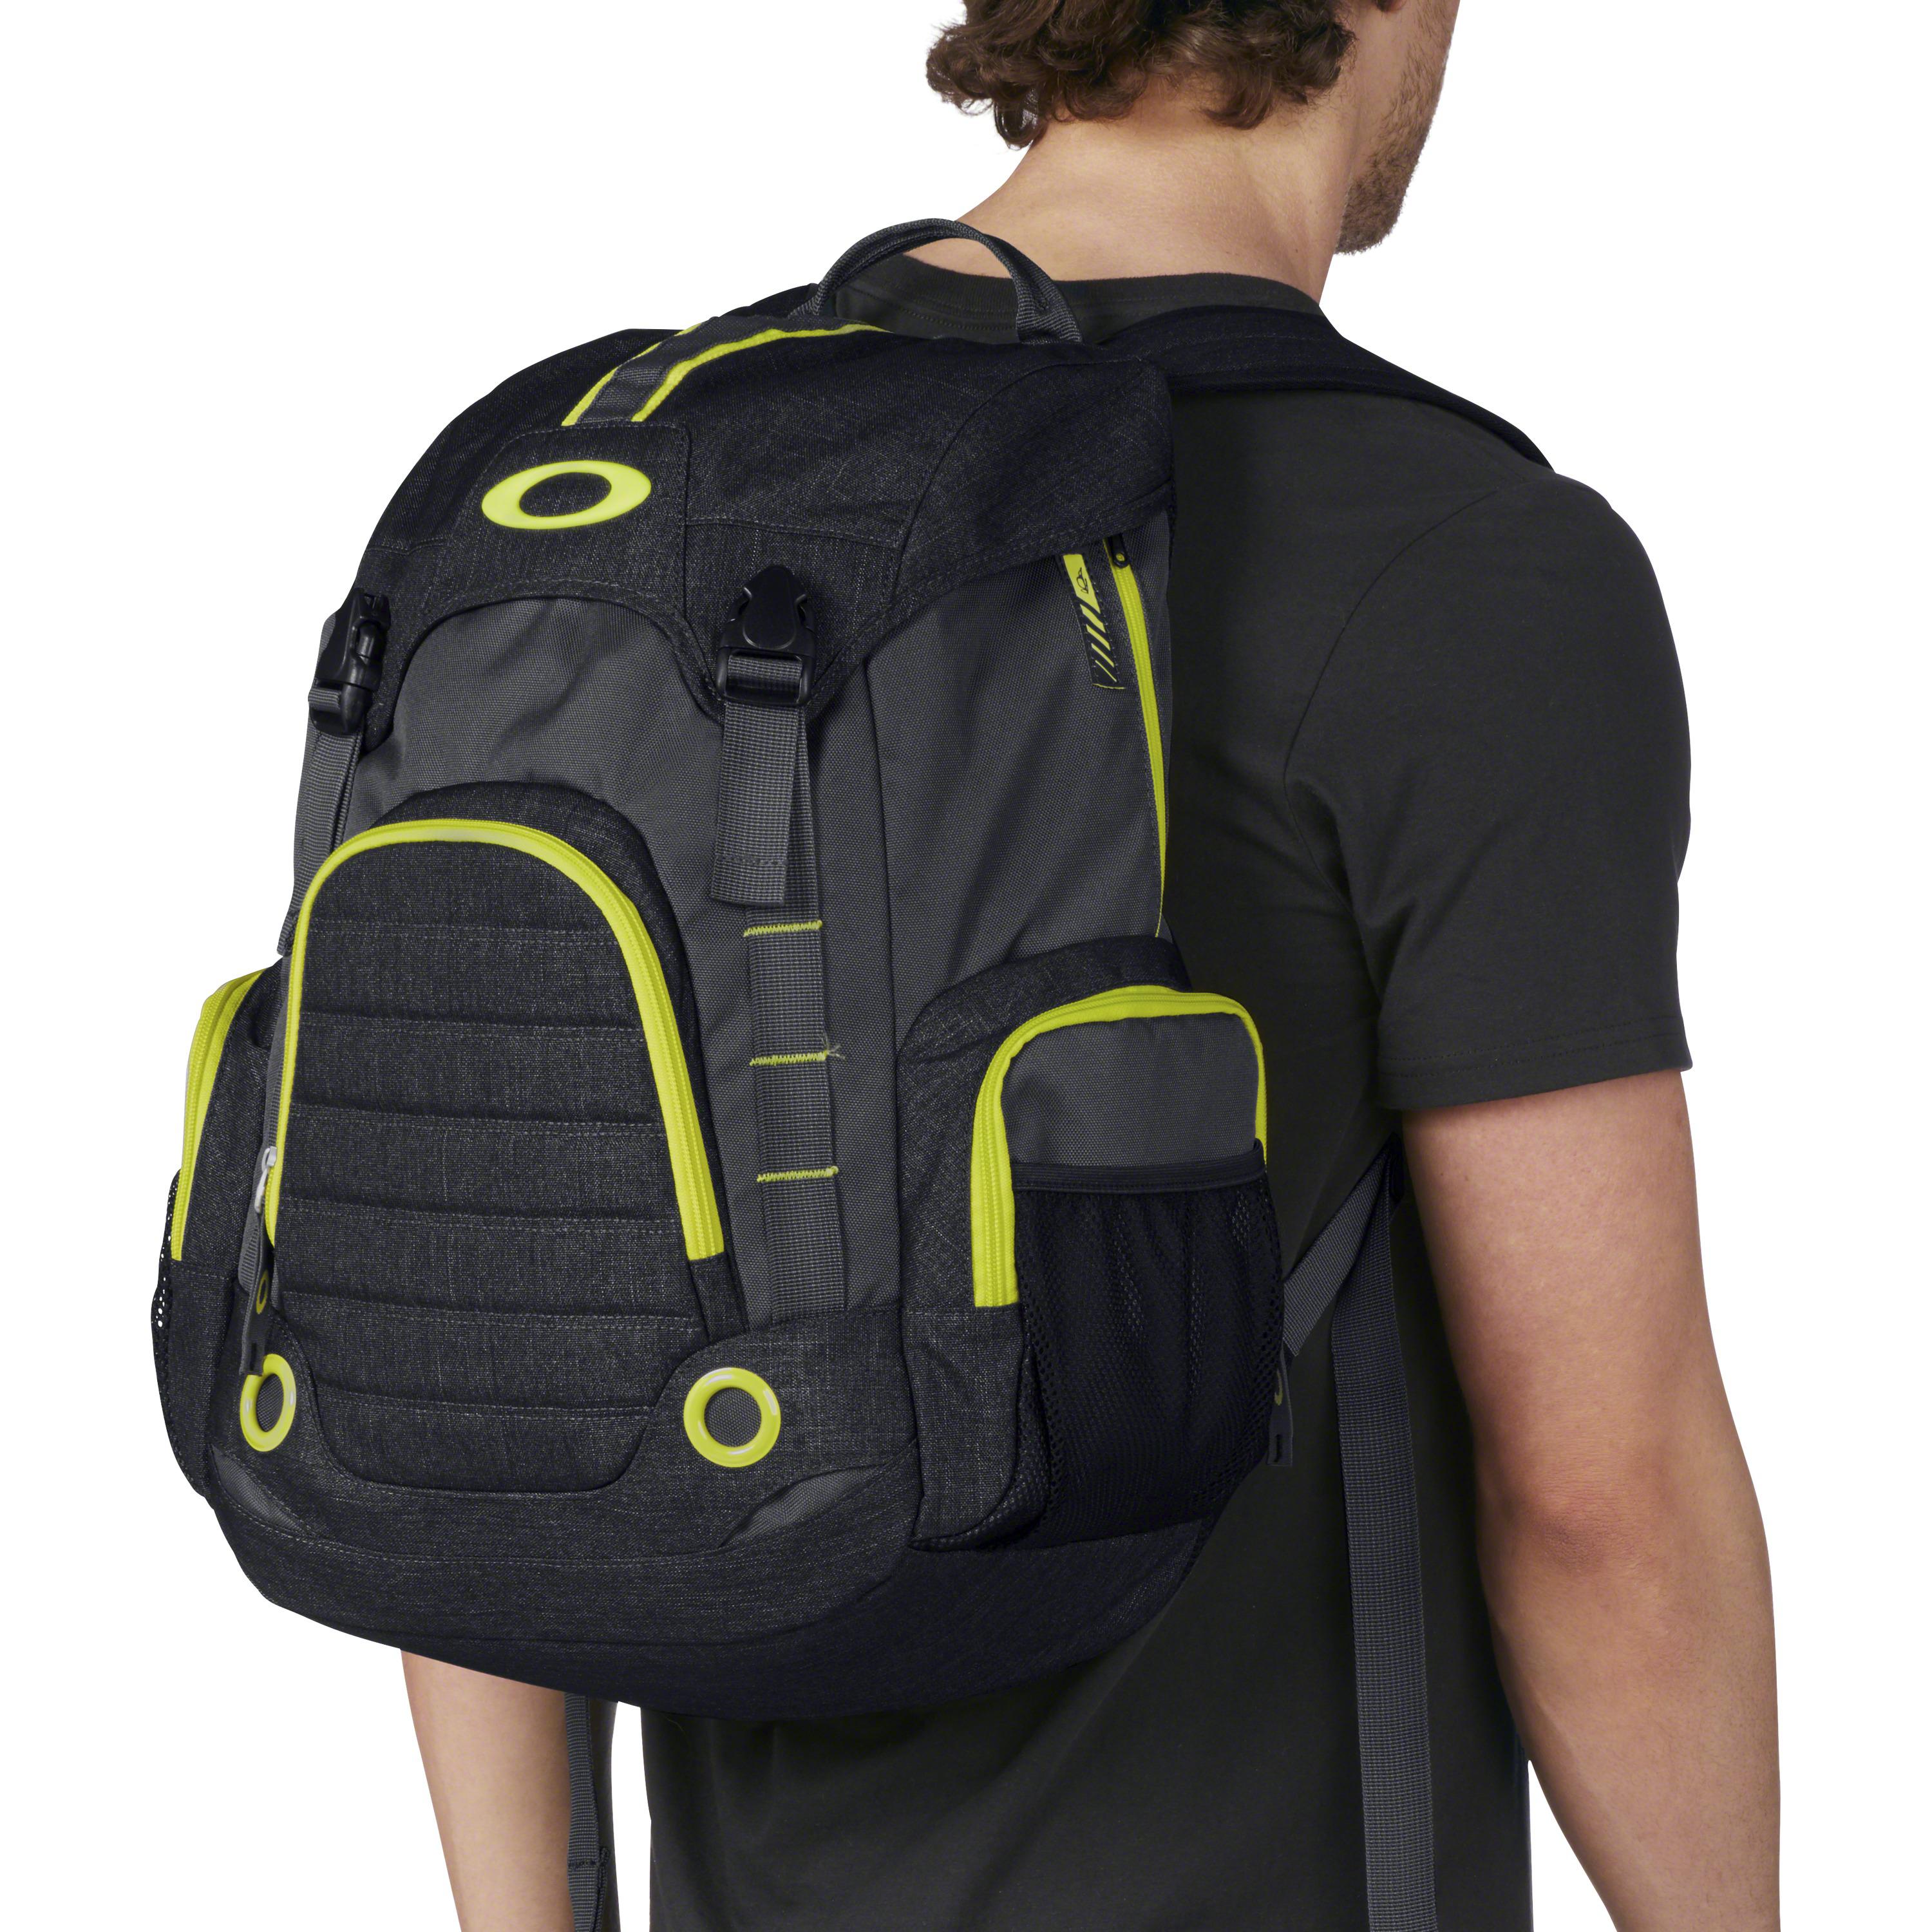 Oakley Synthetic Overdrive Backpack in Olive Camo (Green) for Men - Lyst